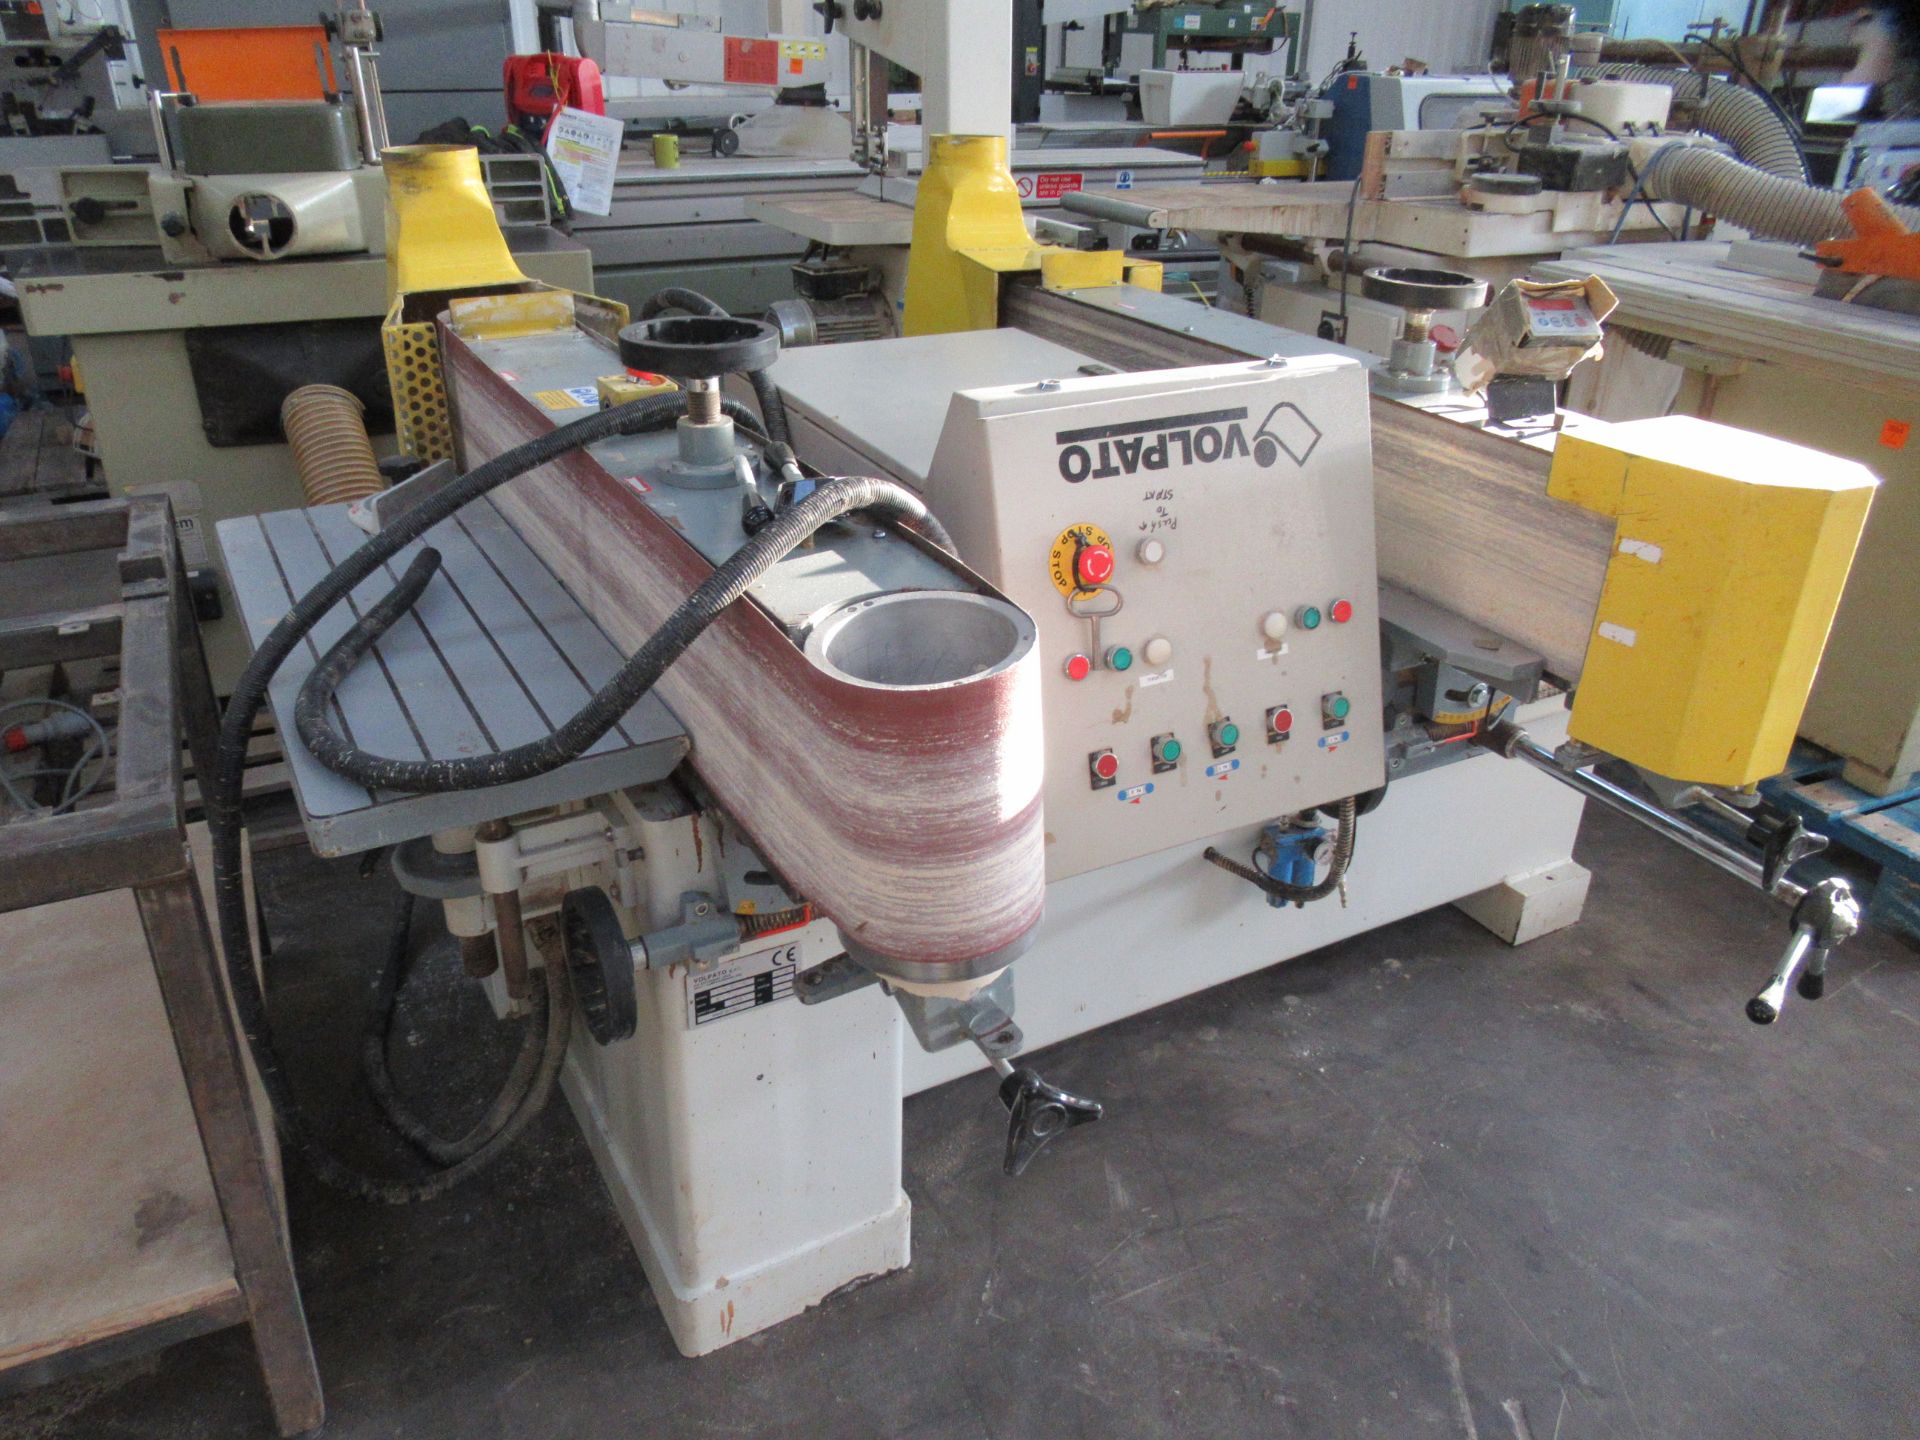 Volpato RCG 1200 Double Sided Sander - 400V; 15.8kW - Image 3 of 9